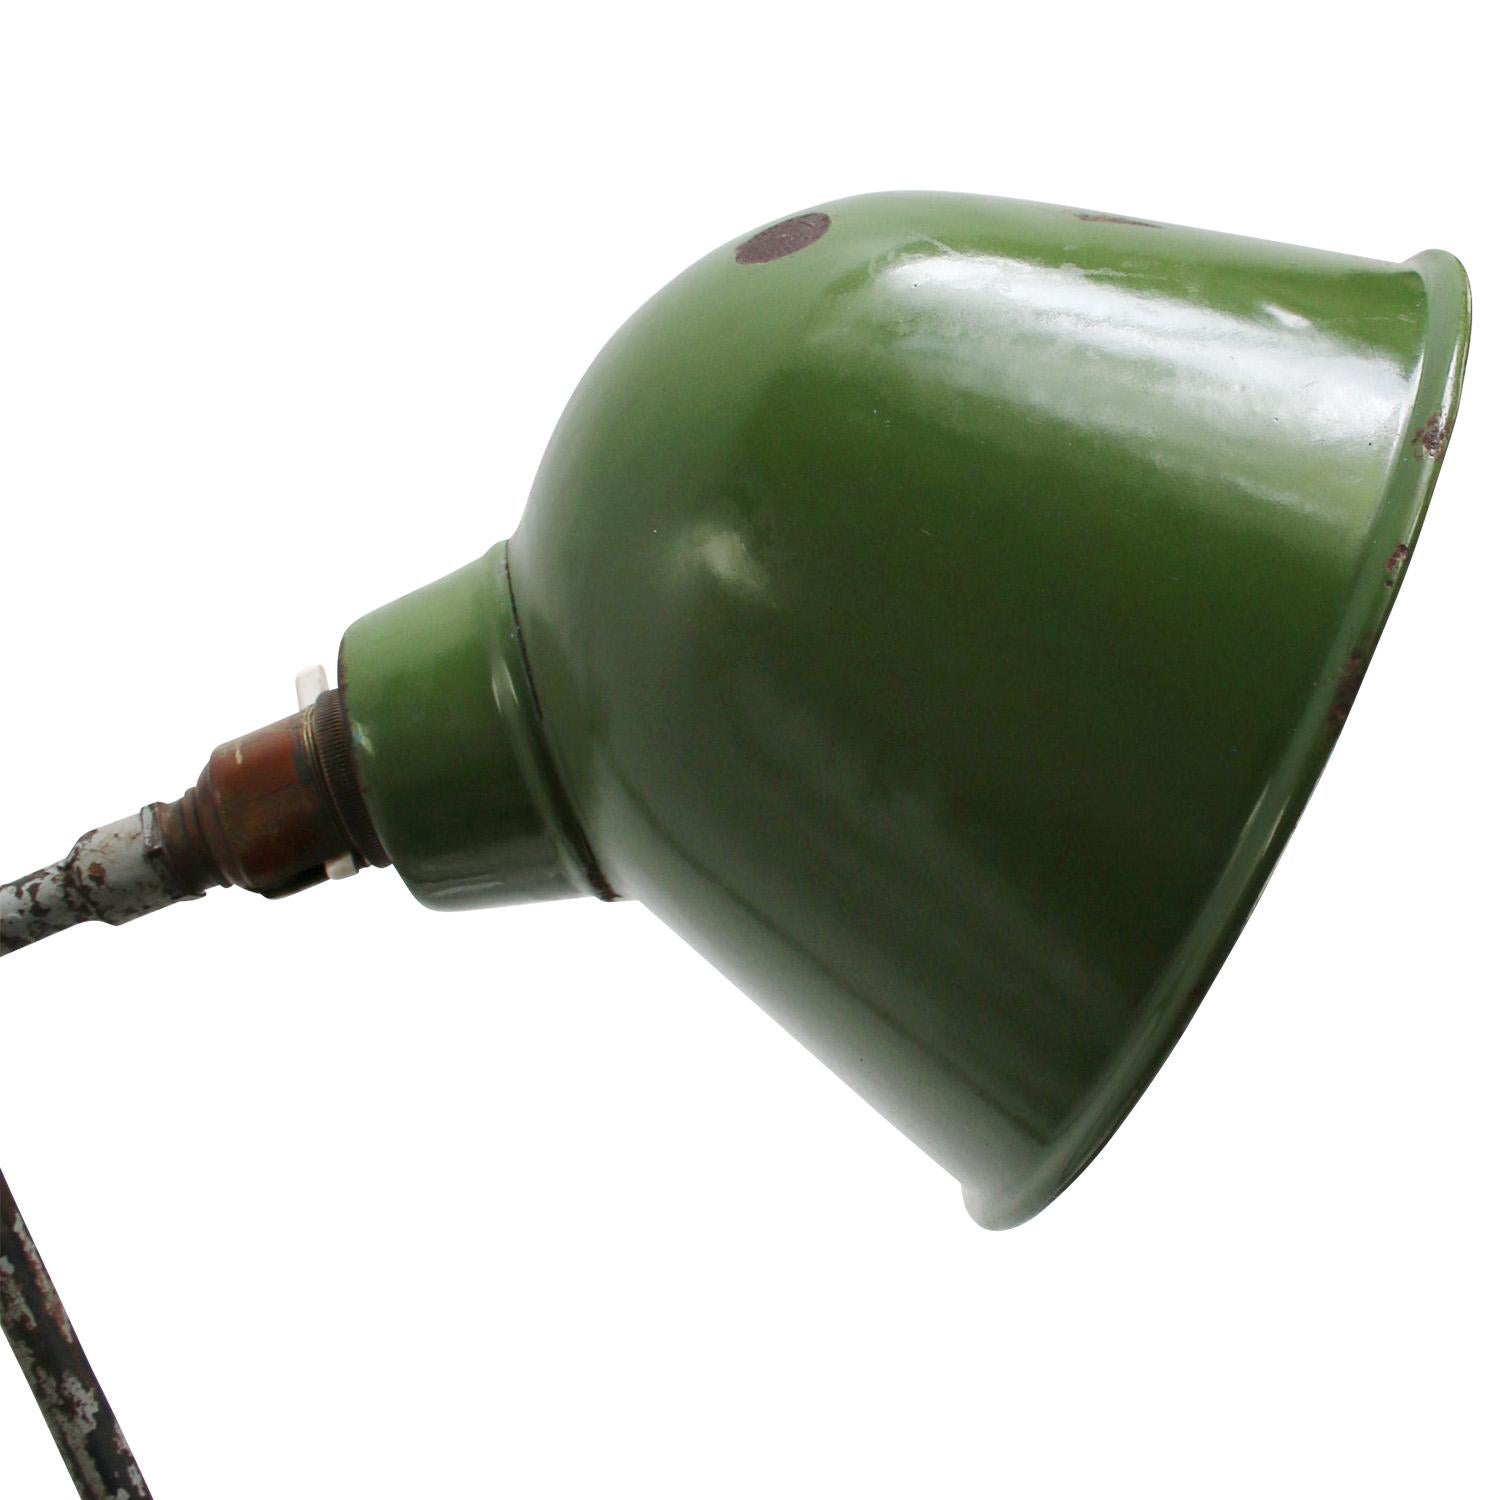 1930s Green enamel, cast iron industrial 2 arm machinist work light by DUGDILLS, UK
adjustable in height and angle
including plug and switch

Width as pictured : 80 cm

Wall base size diameter : 8.8 cm

B22 bulb holder

Priced per